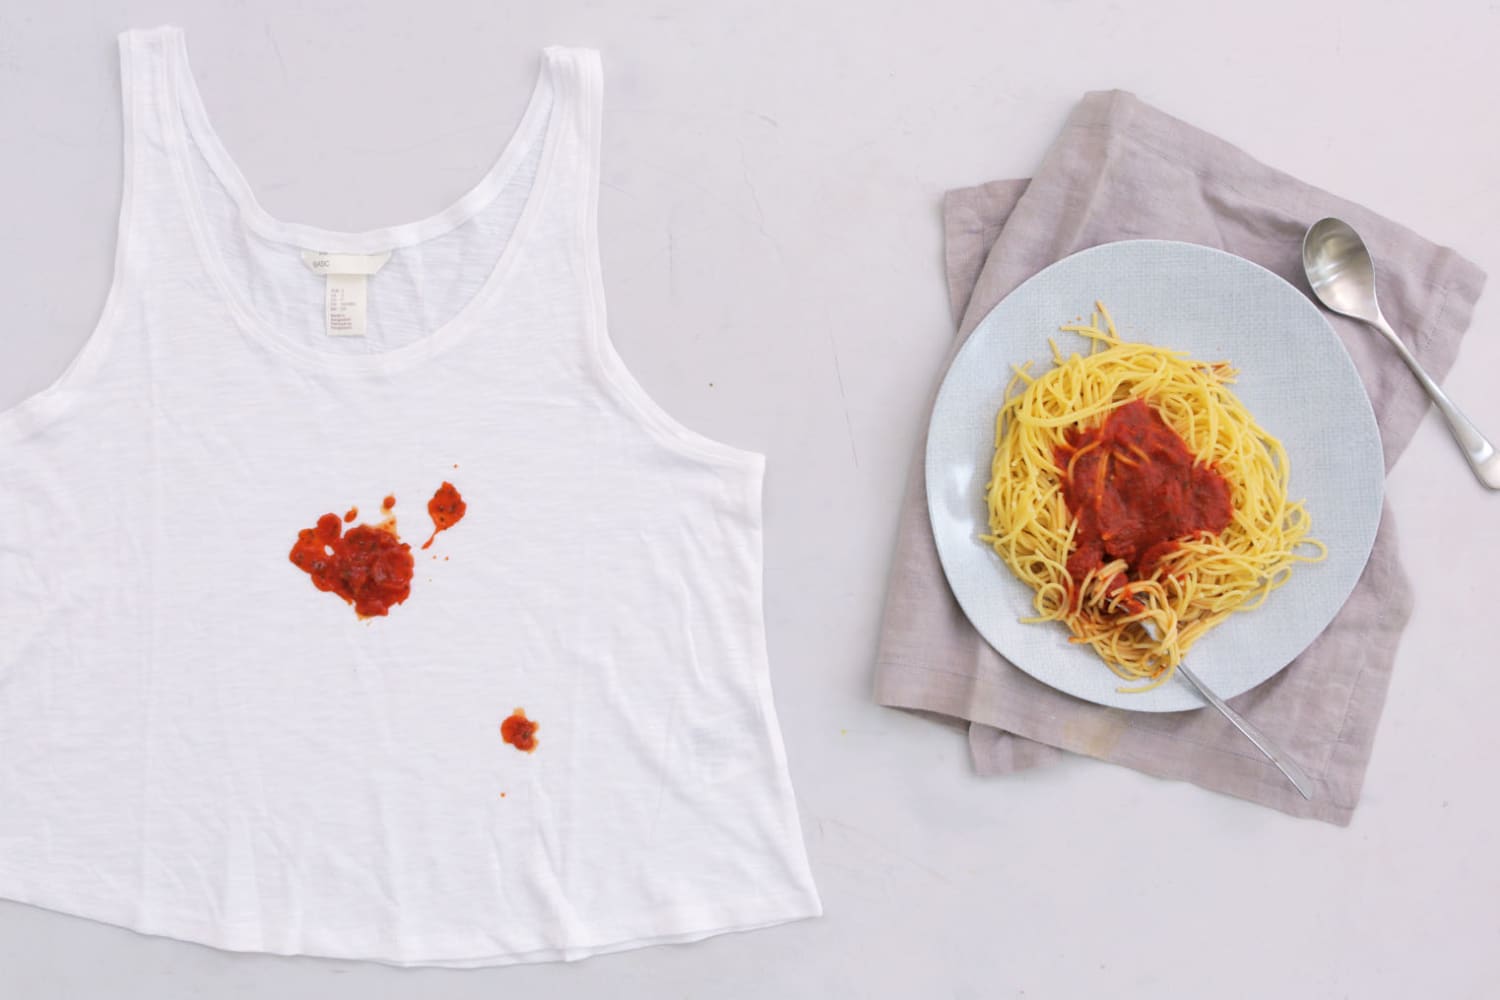 A New Collection Lets You Buy Clothing Stained With Ketchup